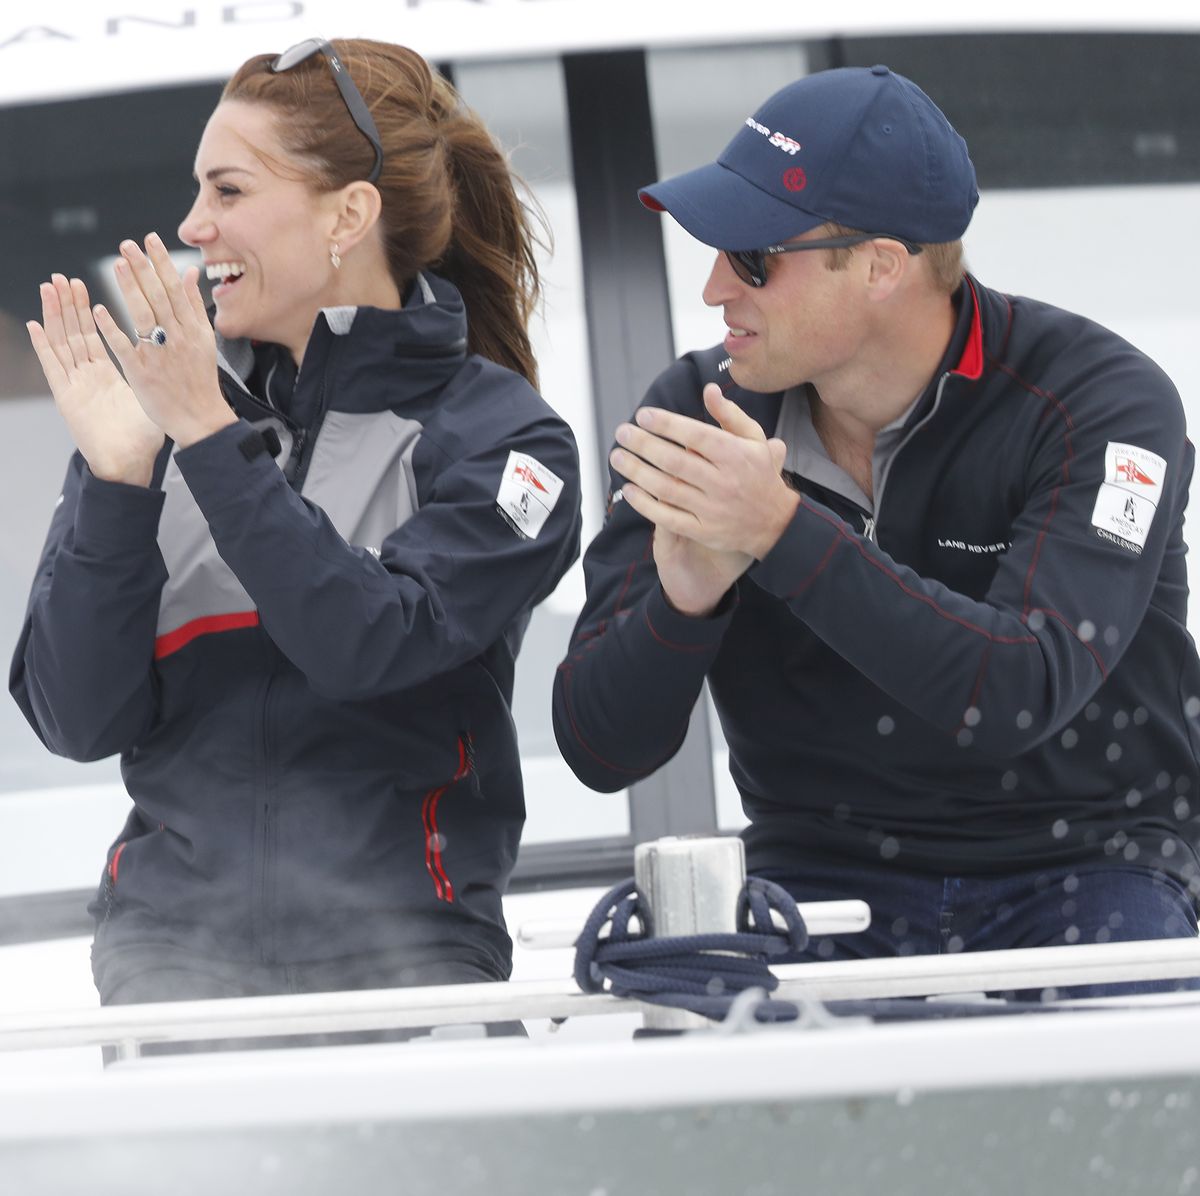 Louis Vuitton America's Cup World Series - Portsmouth: Day Three